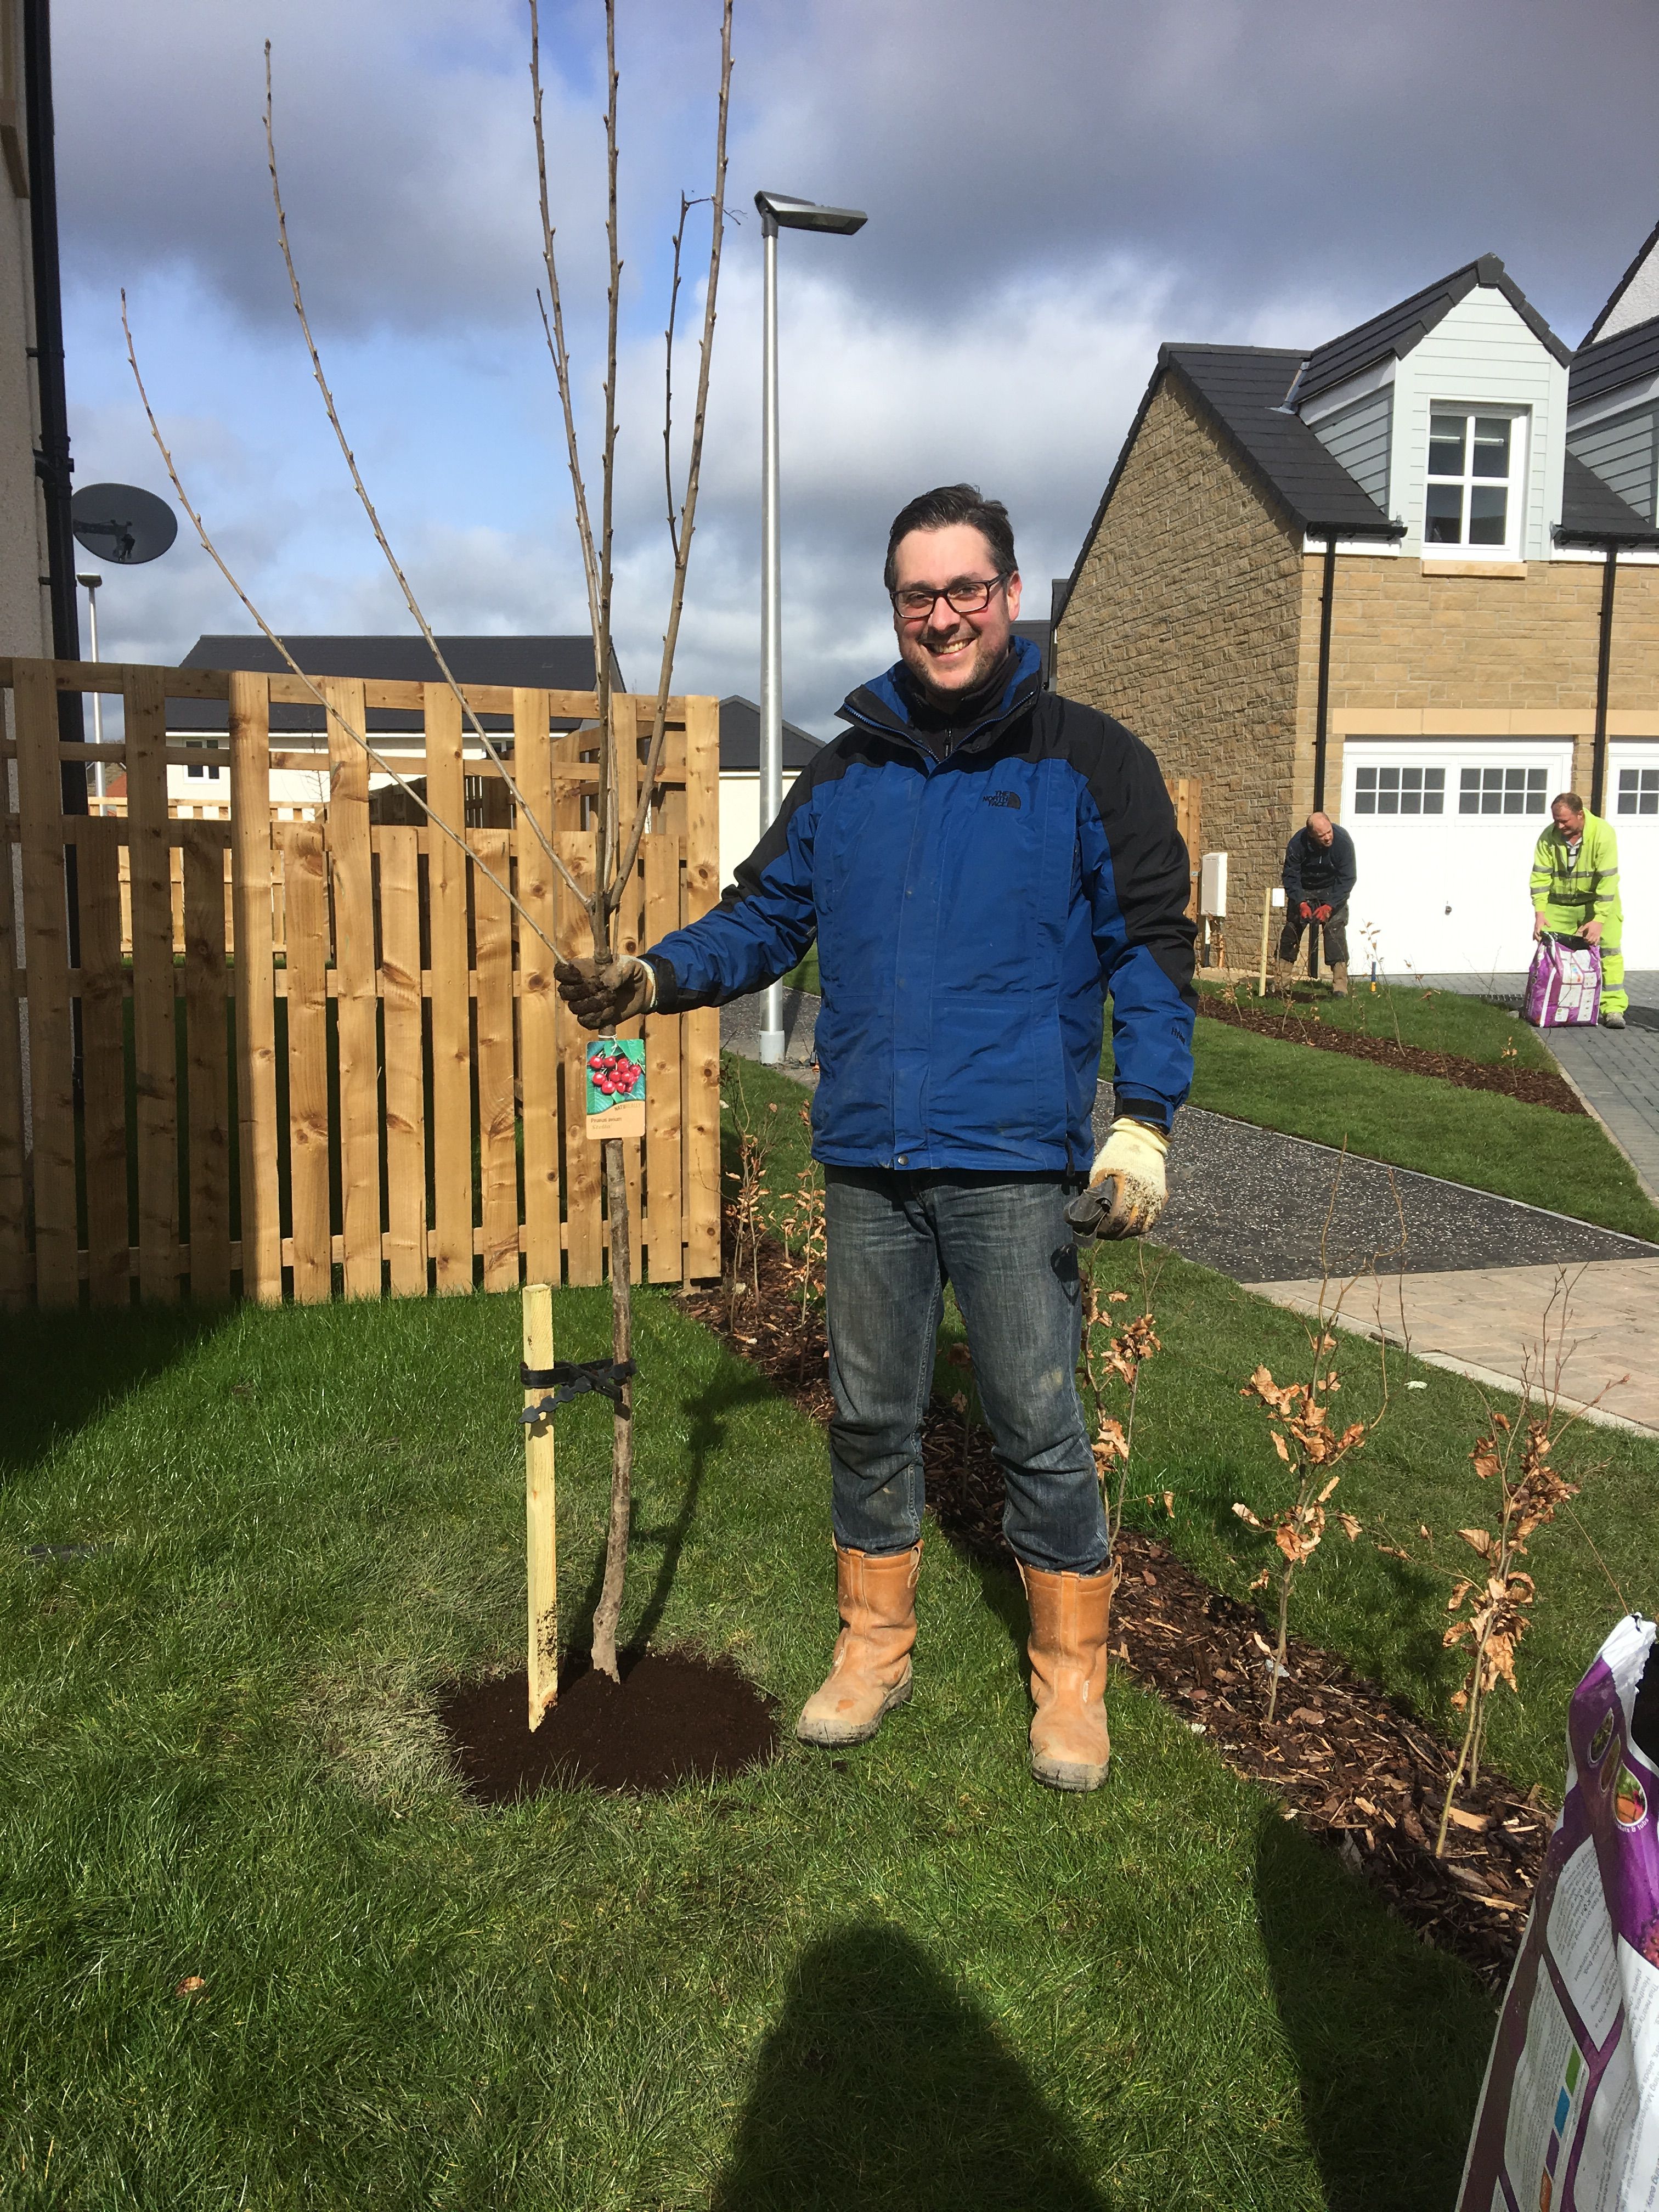 Stirling Developments welcomes new residents with fruit trees